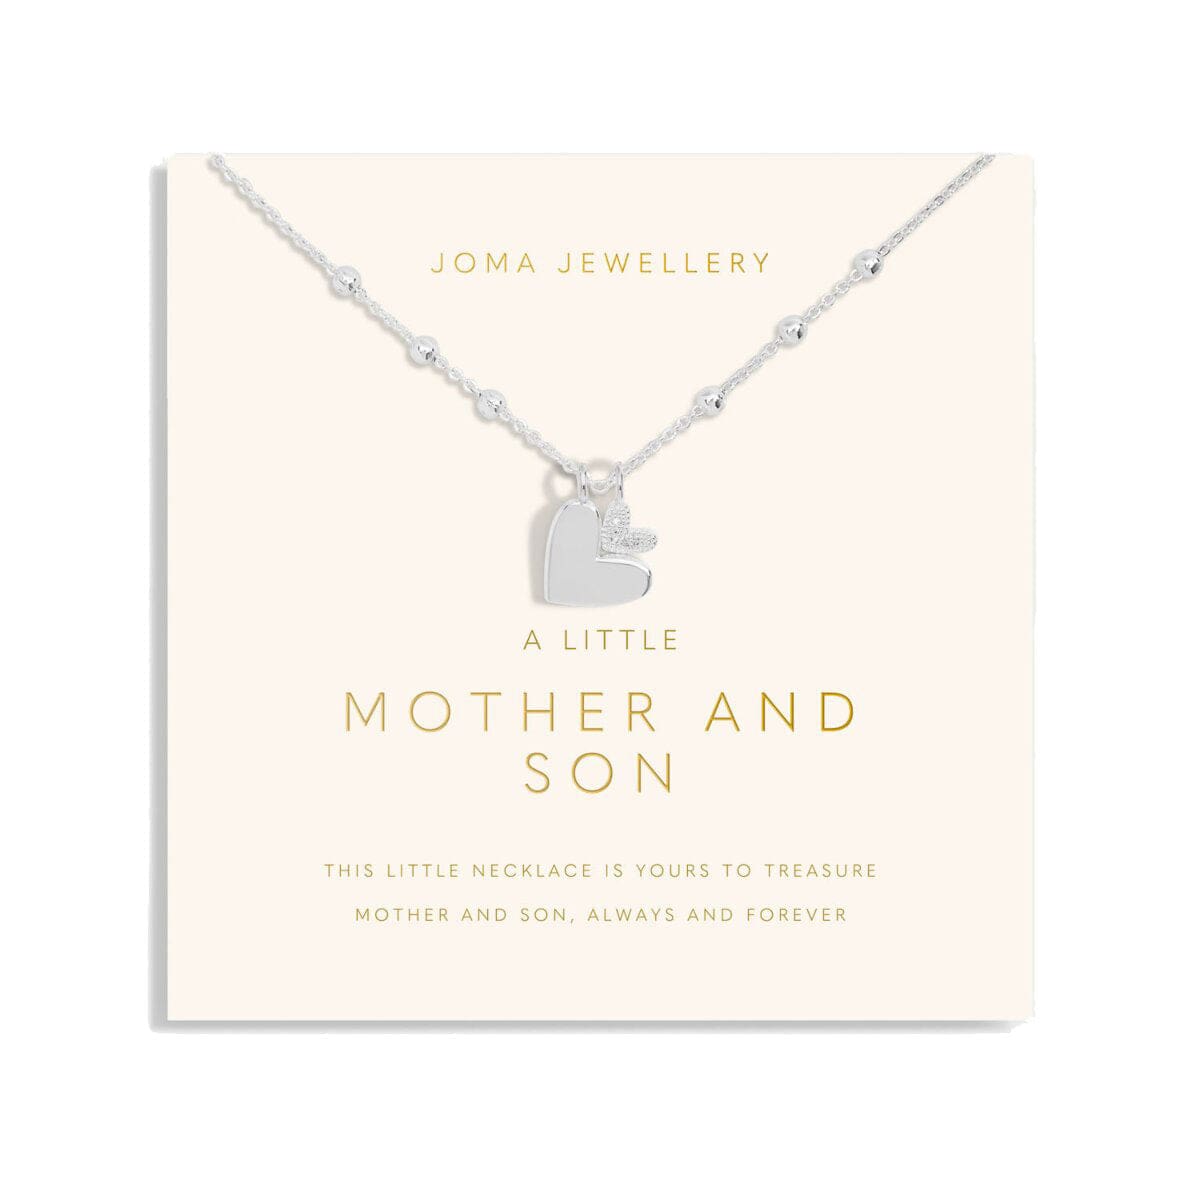 Joma Jewellery Bracelets Joma Jewellery Necklace - A little Mother And Son